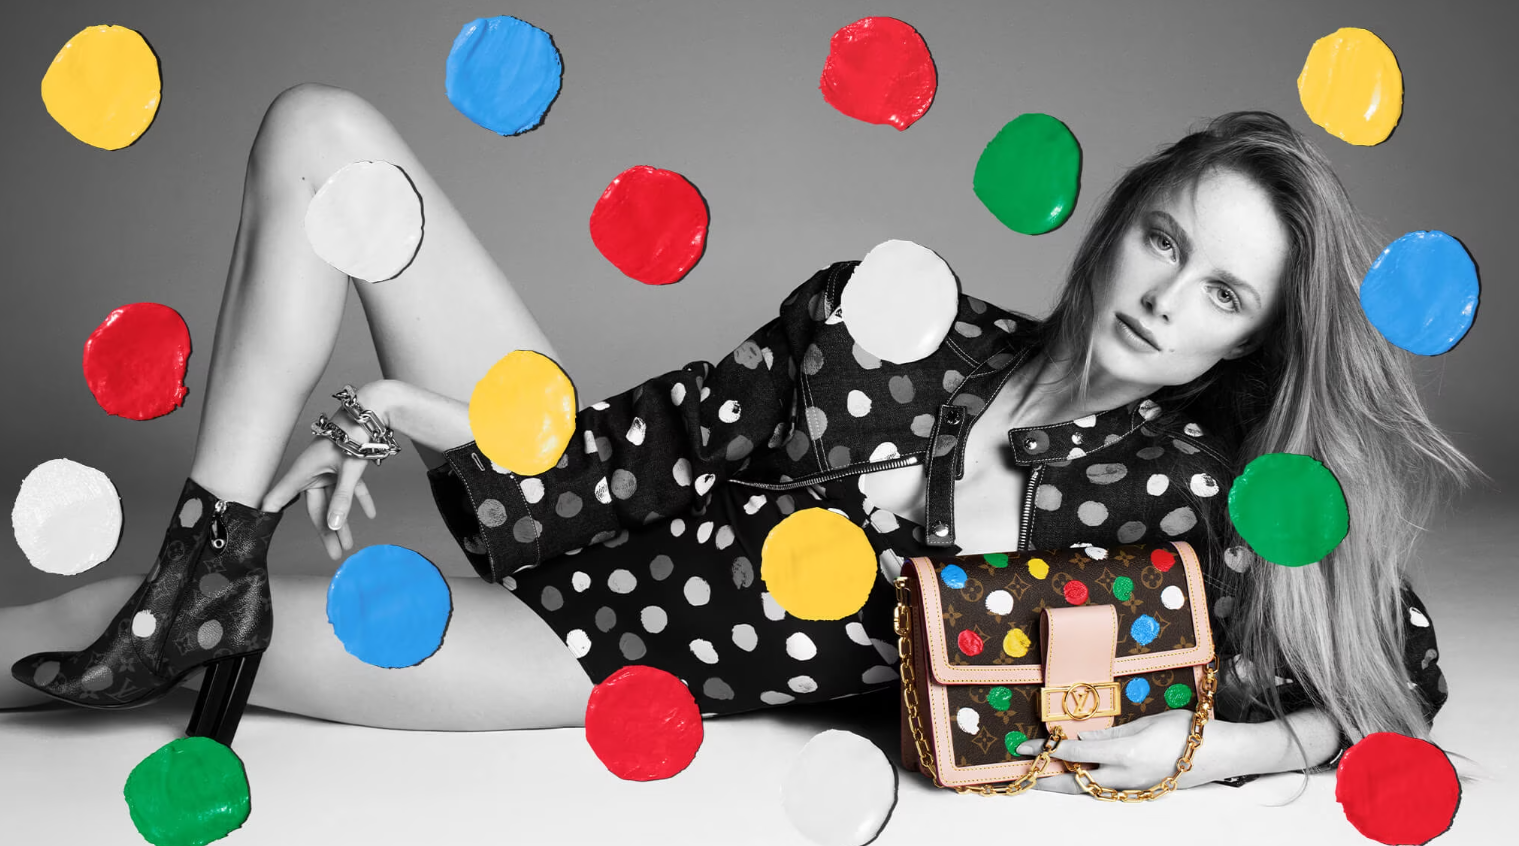 Painted Dots Product from Loius Vuitton